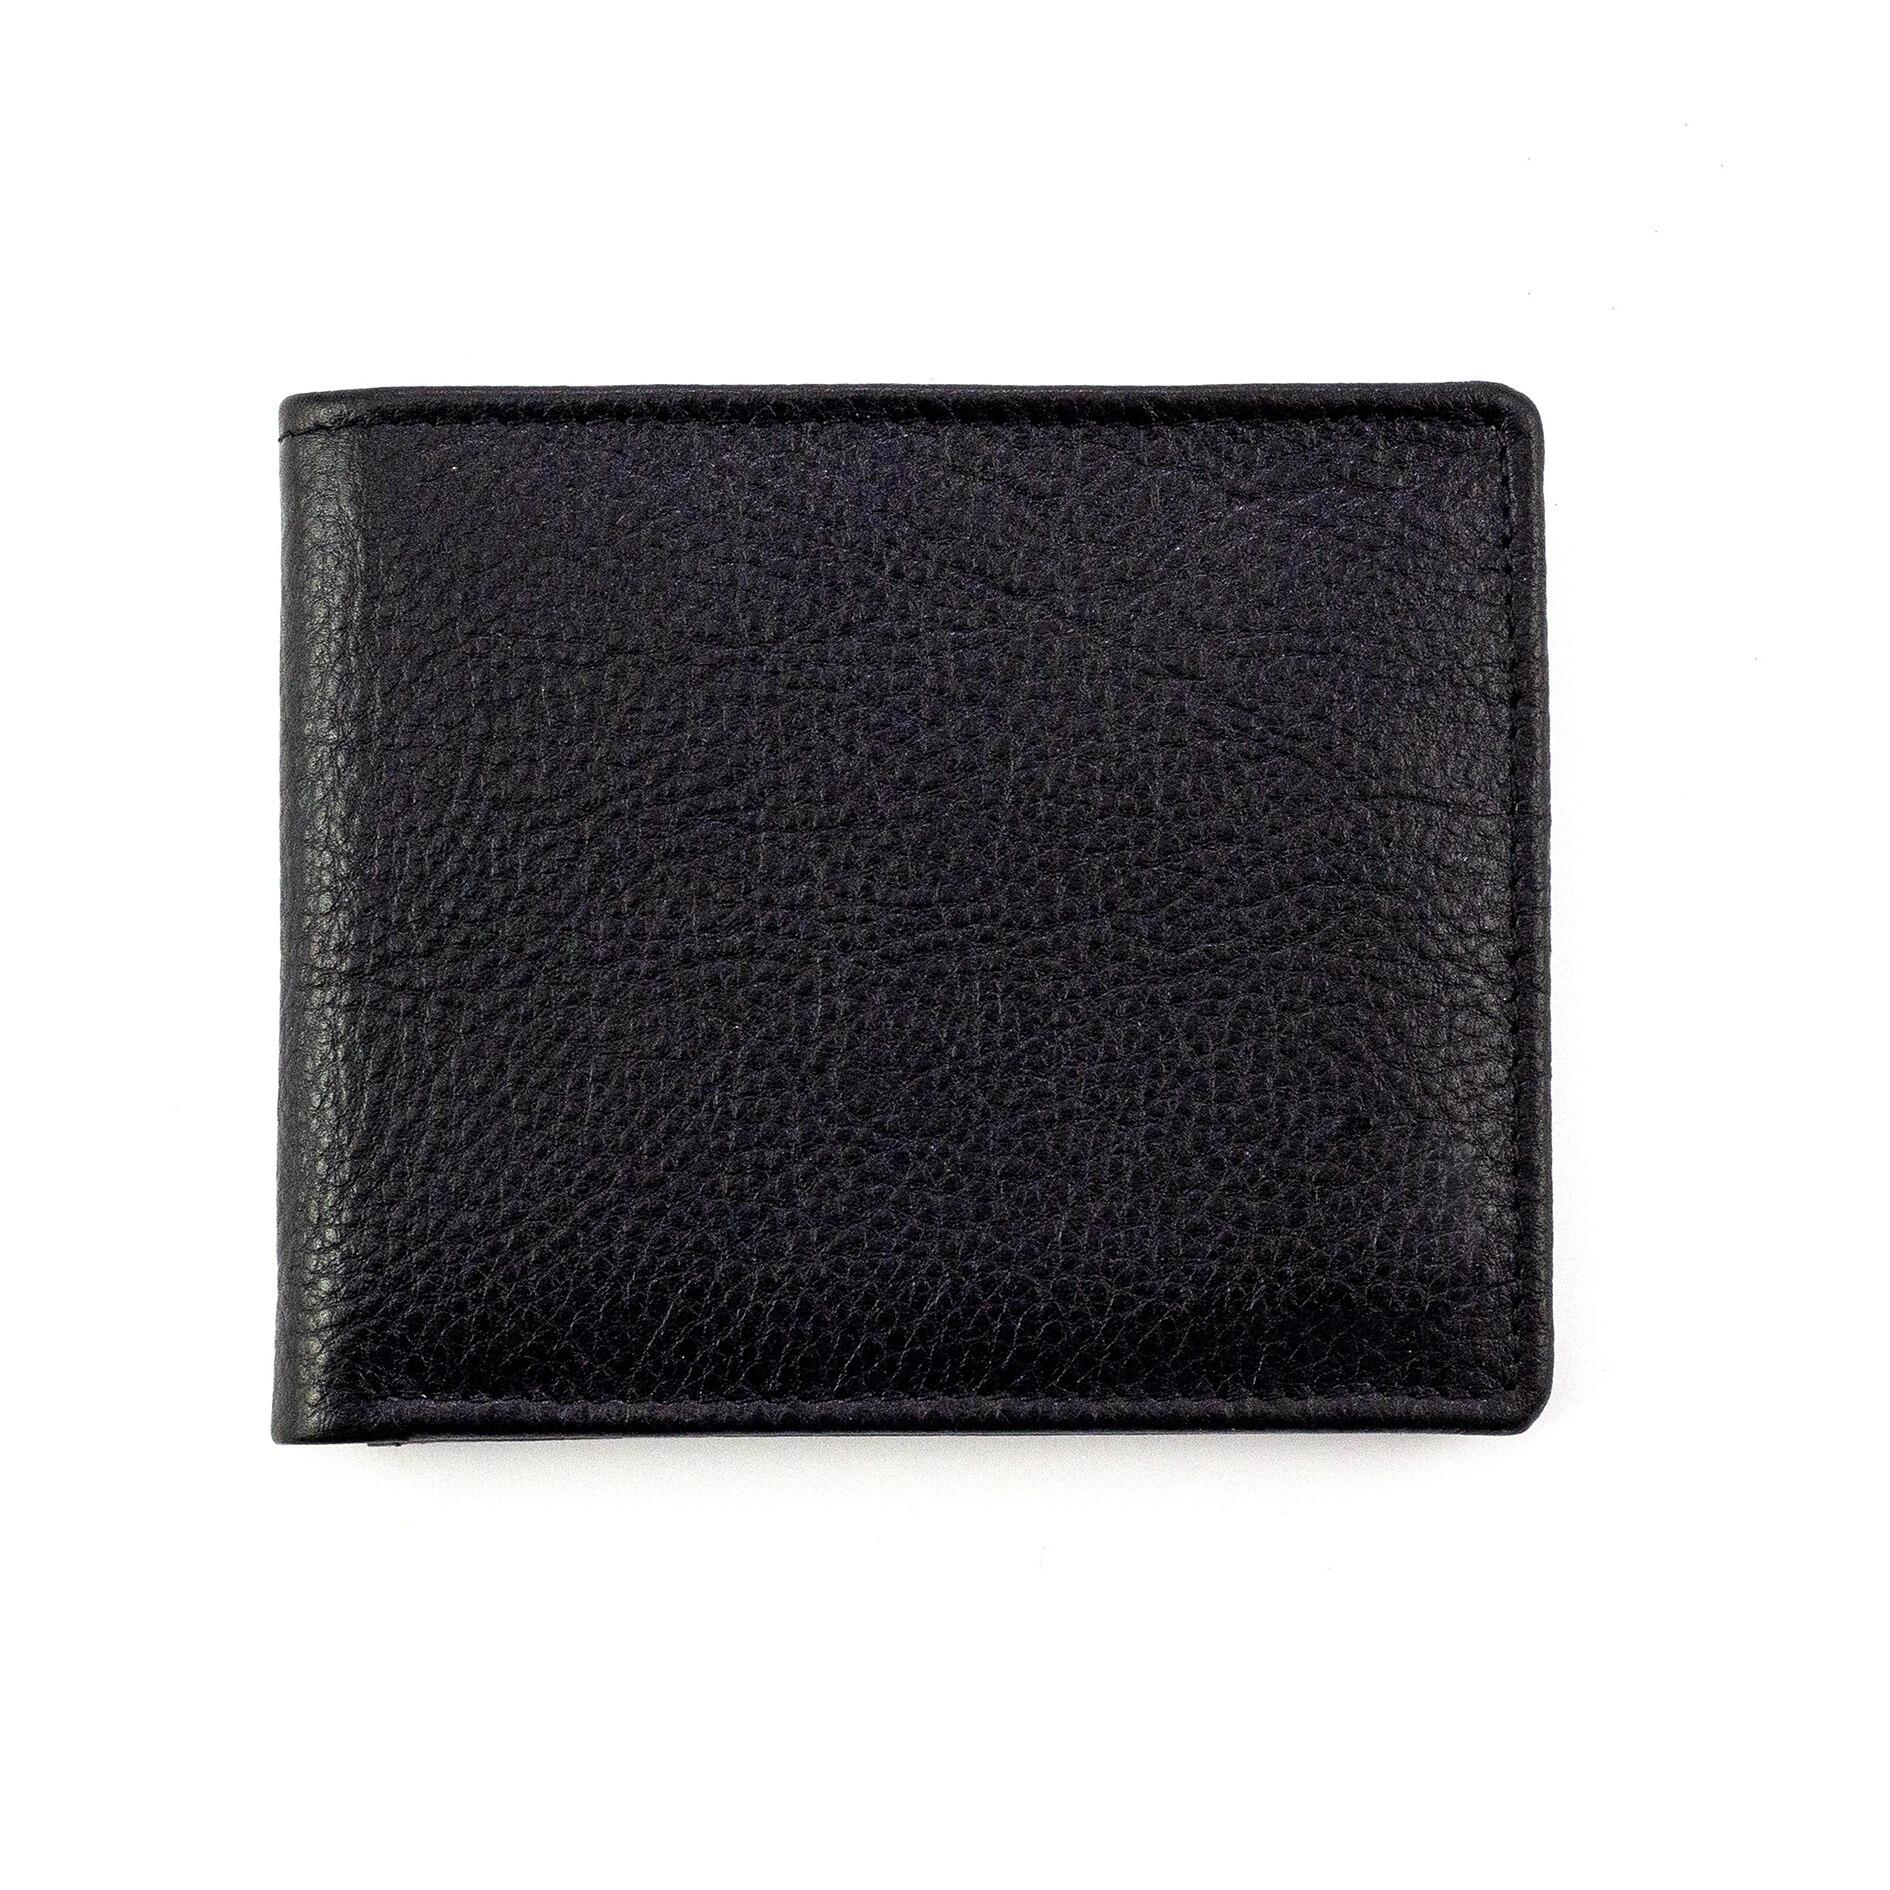 Bifold Leather Wallet From GH Frecknall & Co LTD - Personalise for FREE